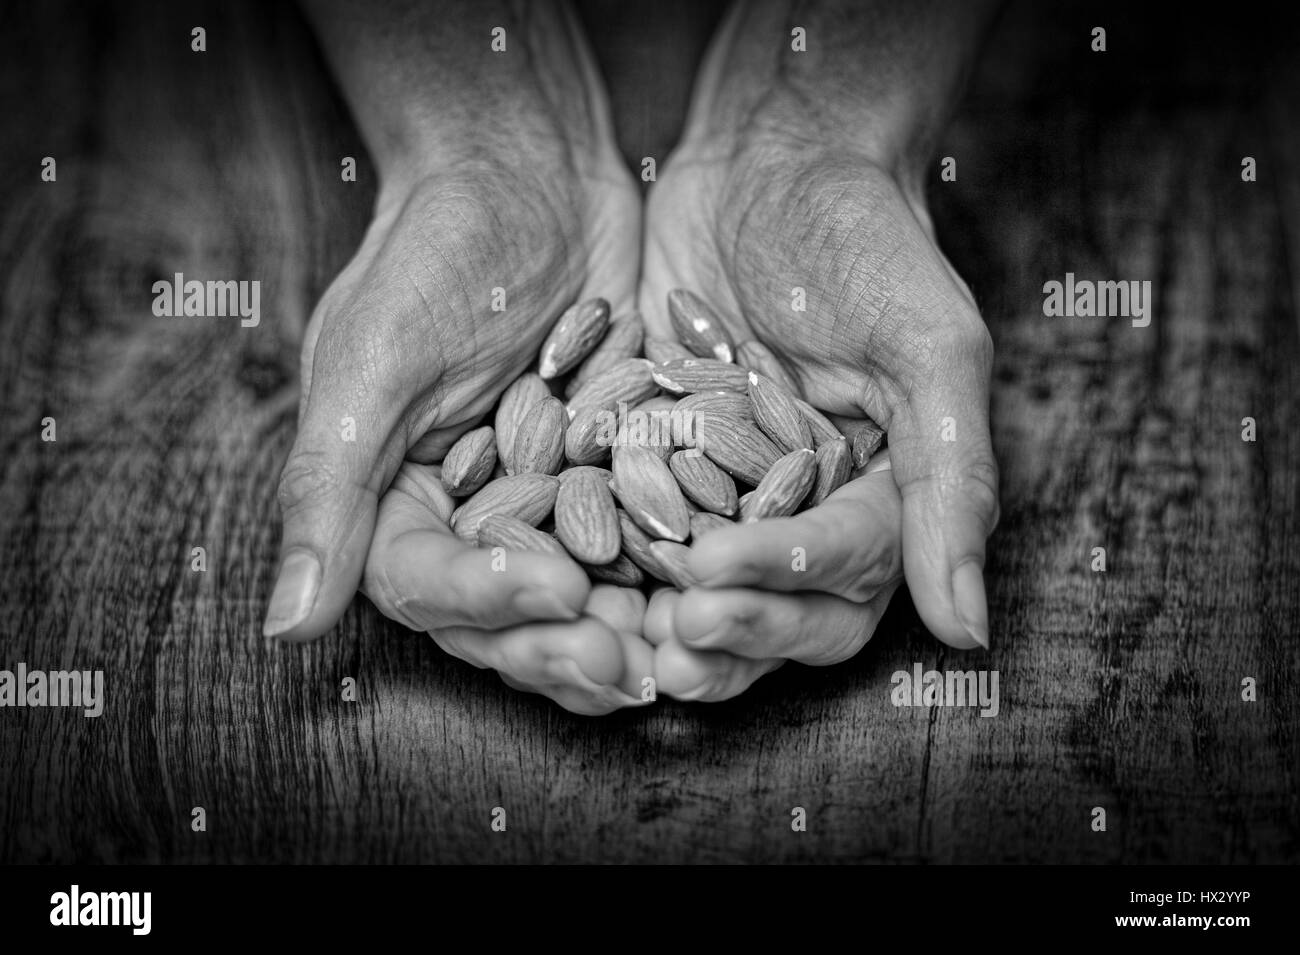 hands holding almonds Stock Photo